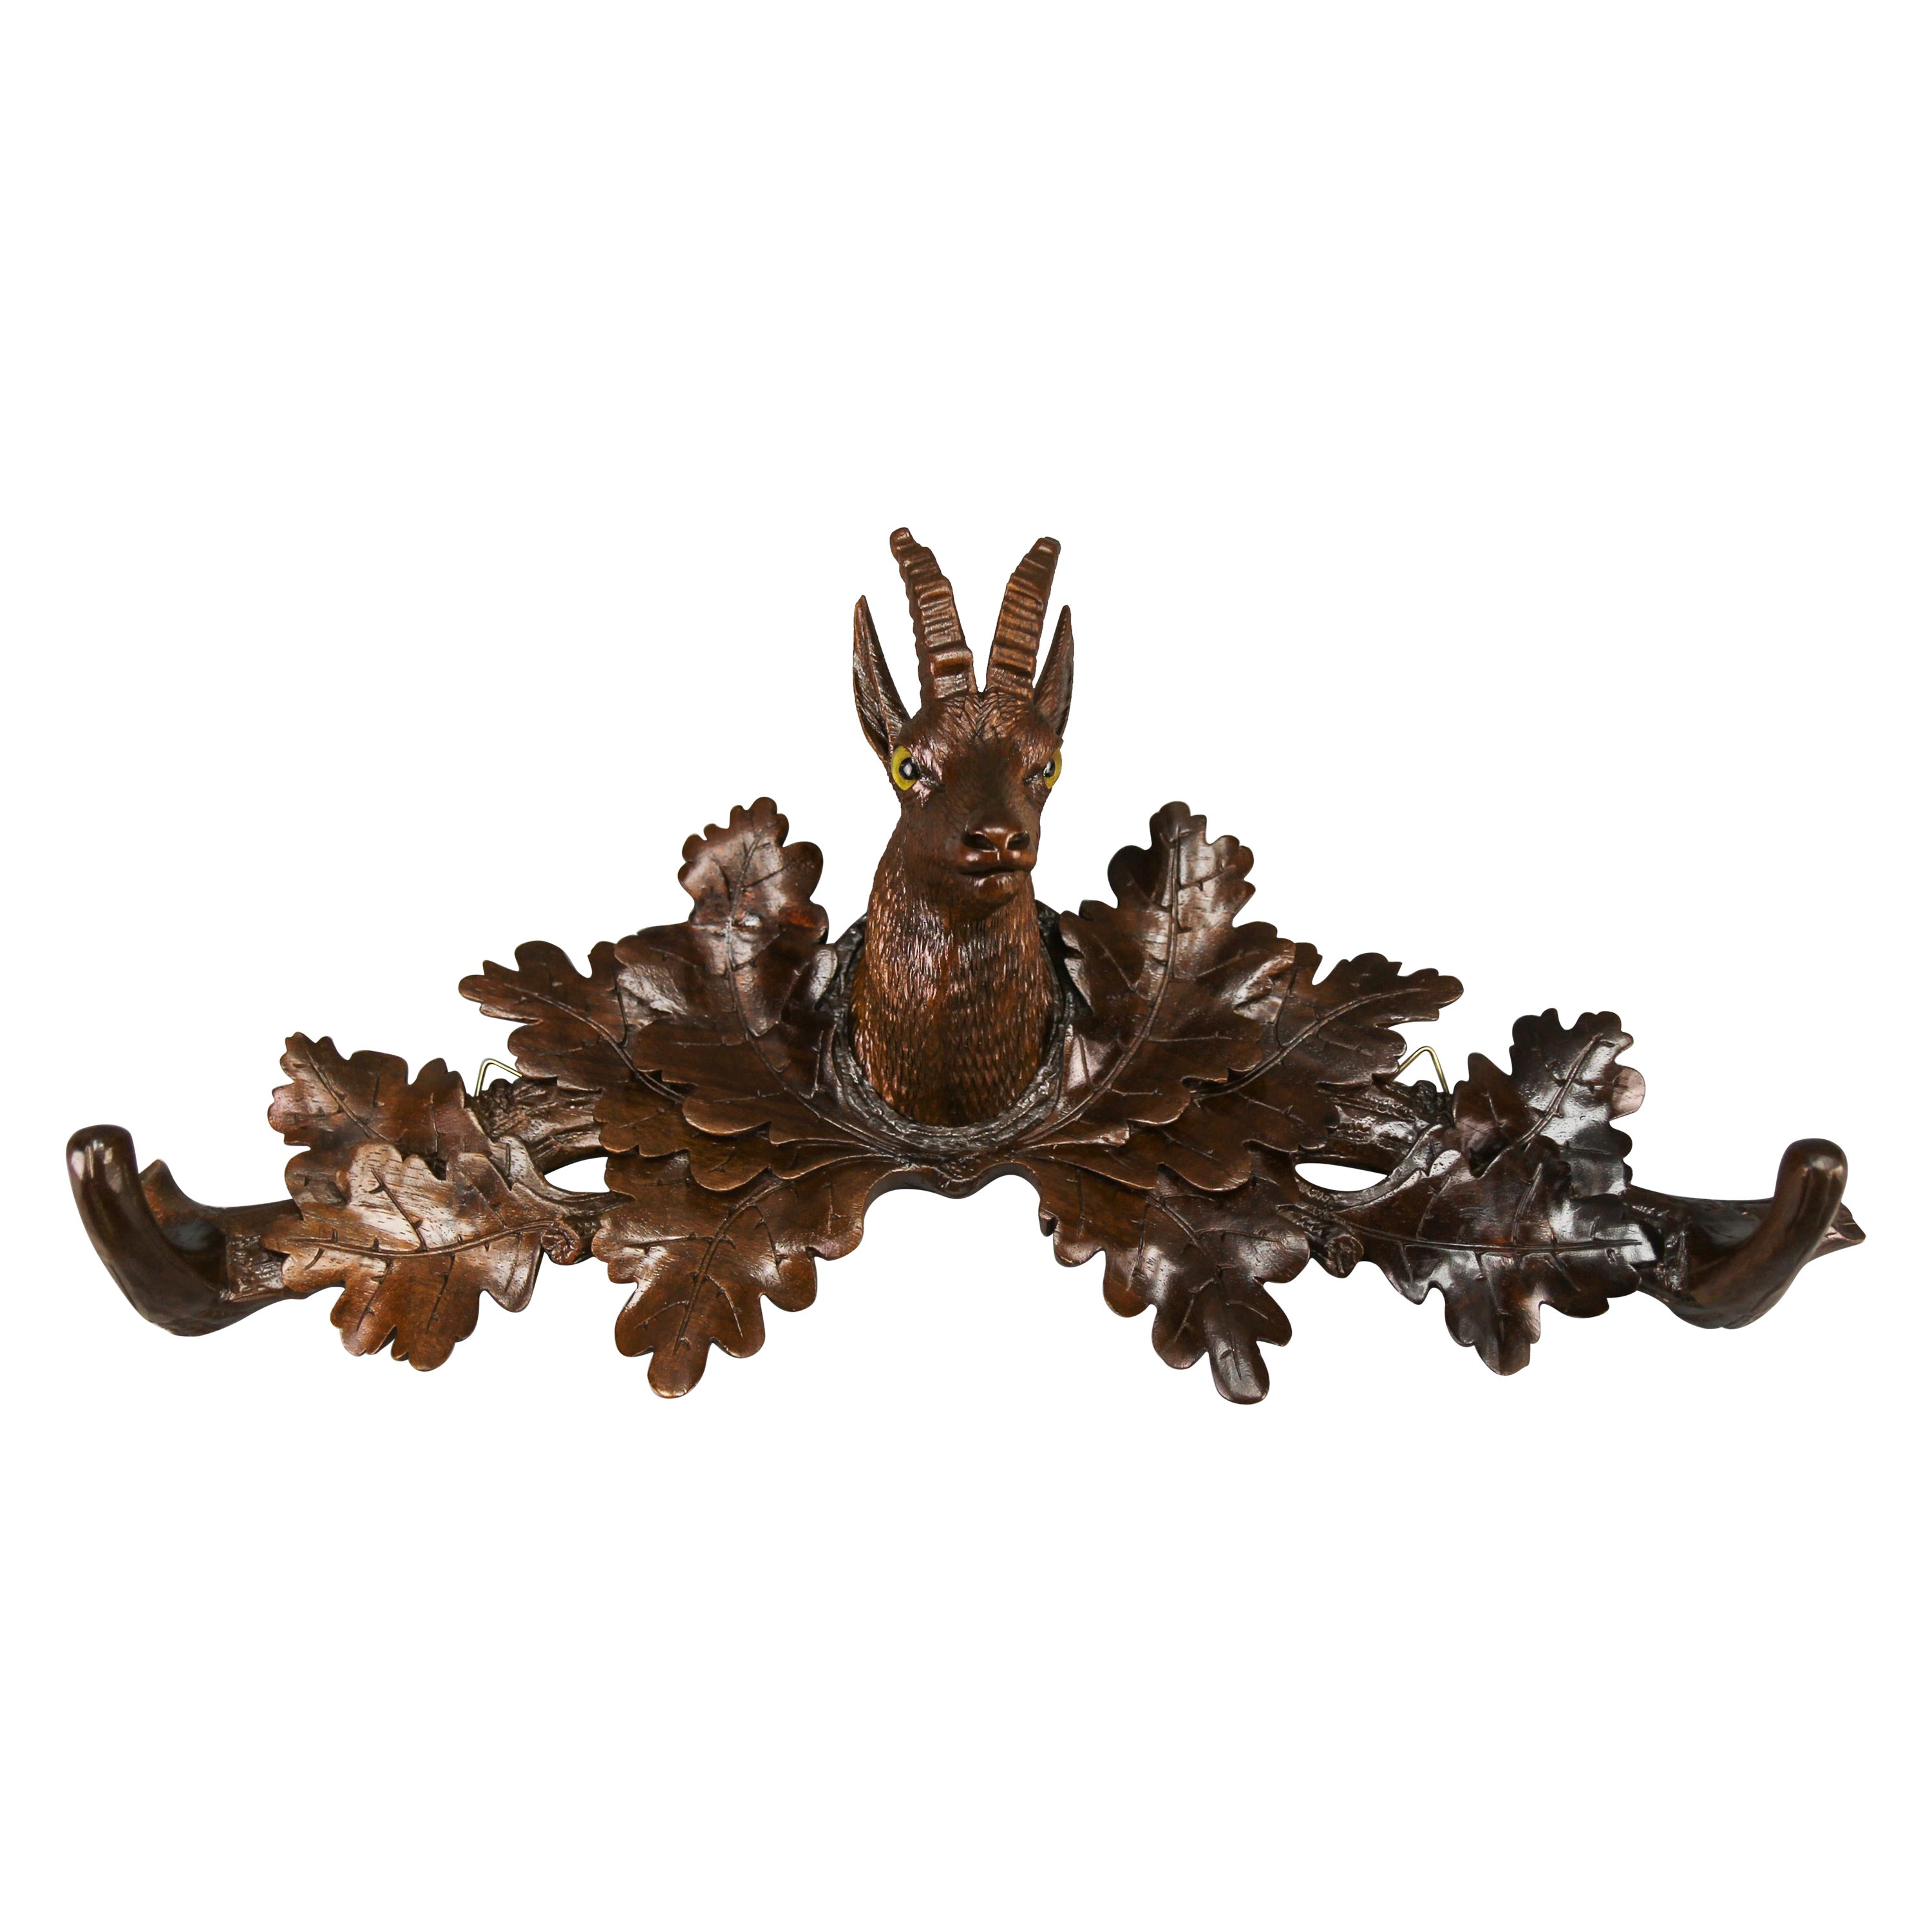 Antique Swiss Black Forest Carved Chamois Wall Hanging Coat and Hat Rack